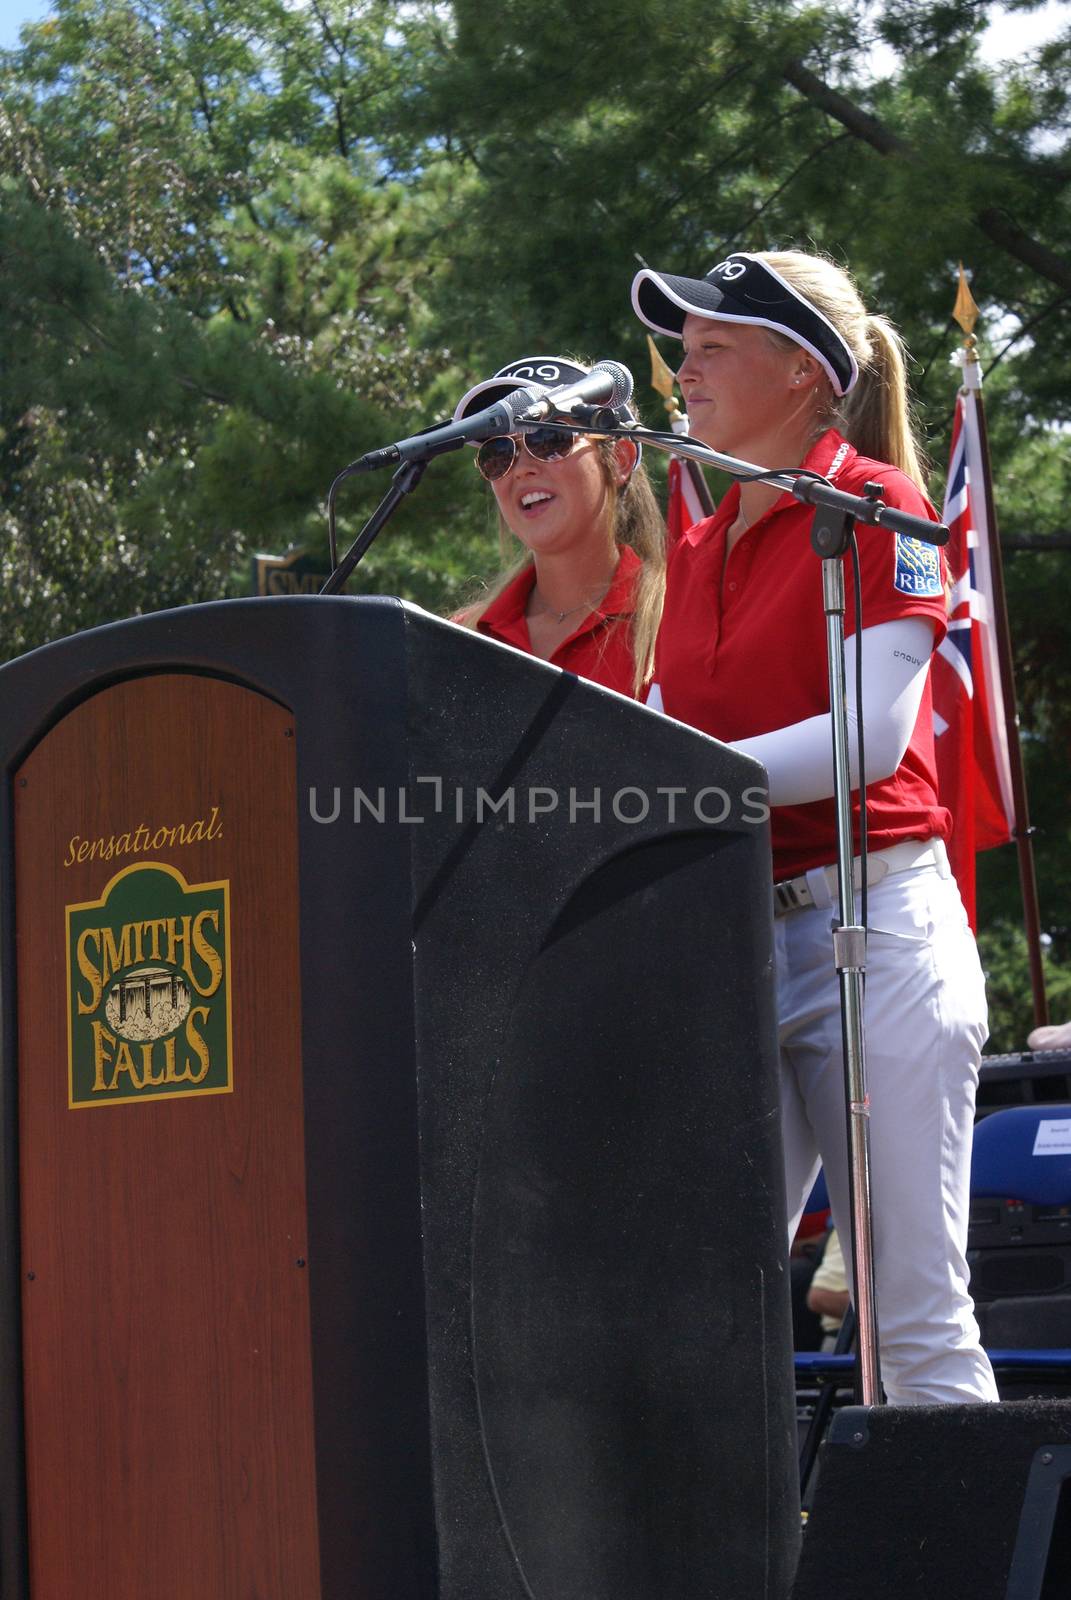 SMITHS FALLS, ON, CANADA, SEPTEMBER 09, 2016 - A 50 Editorial Image Series of Pro Golf Sensations Brooke M. Henderson and her sister Brittany Henderson giving a speech in front of their Hometown of Smiths Falls shortly after the efforts in the Summer Rio Olympics.